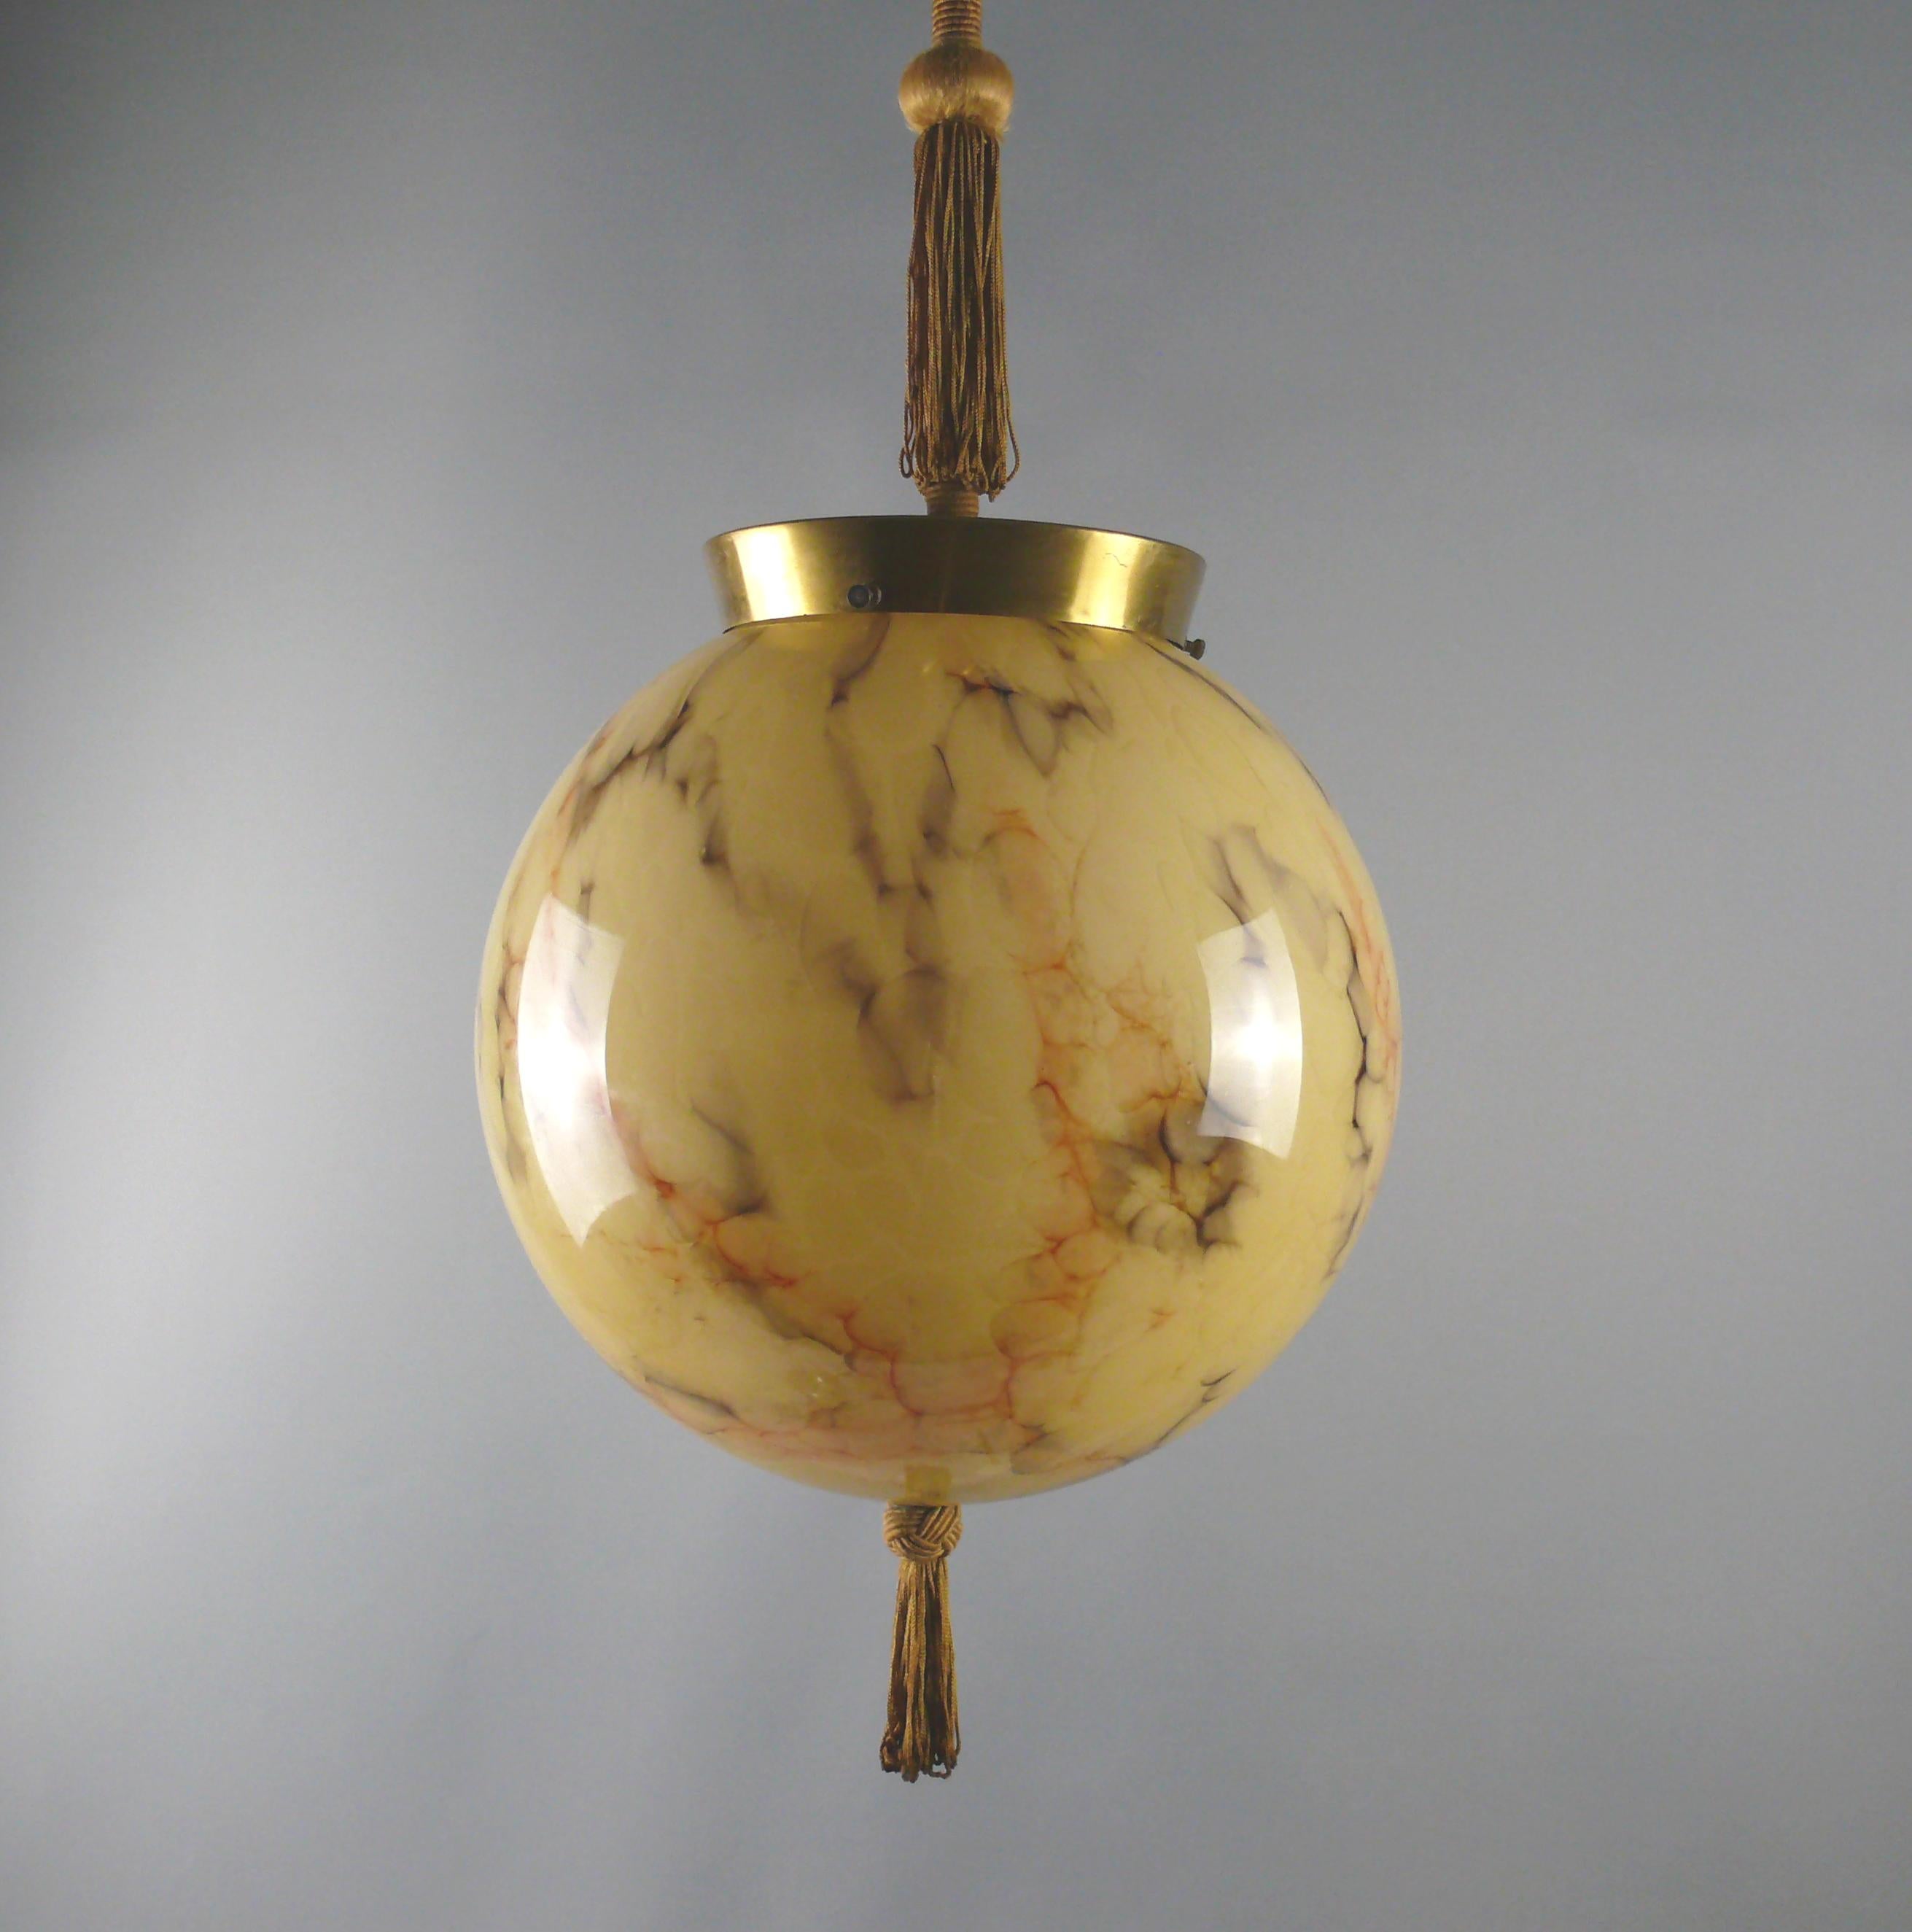 Elegant Art Deco ball lamp with brass suspension, wrapped pendulum rod, tassel and large, marbled glass shade. The beige glass shade is streaked with brown and red stripes. The lamp dates from the first half of the 20th century (1930 - 1950) and is